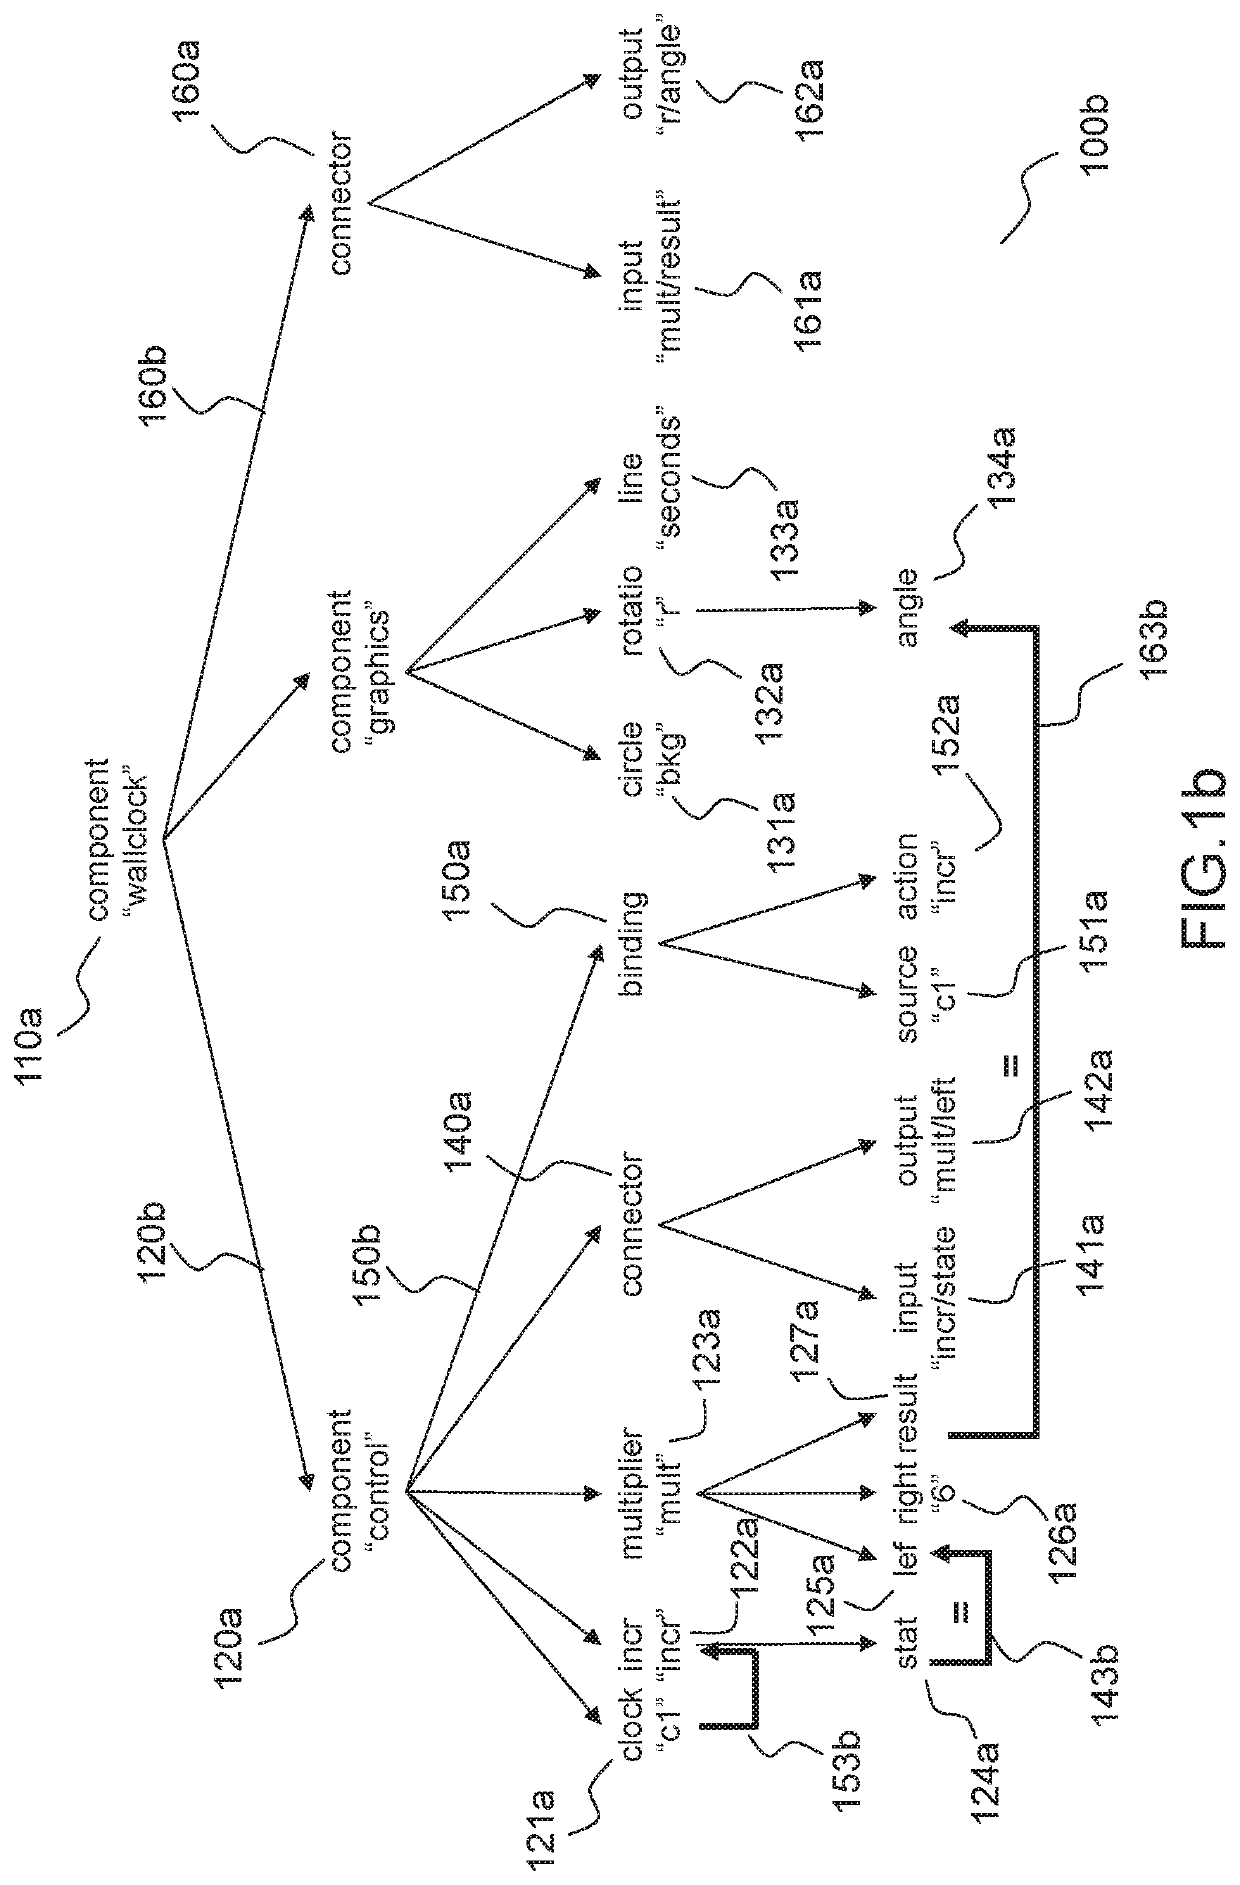 Method, software and processing unit for verifying properties of interactive components